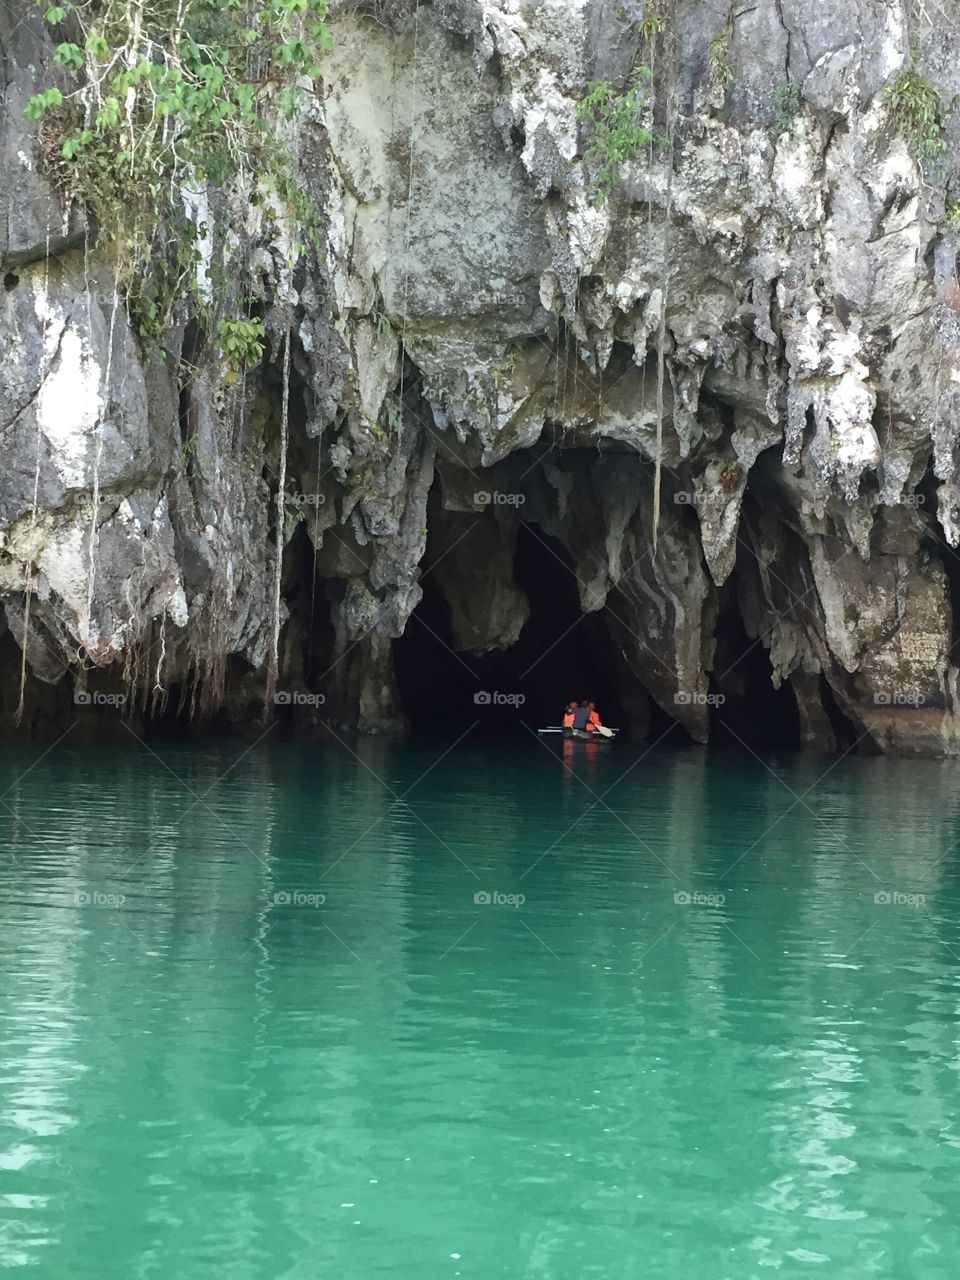 The Underground River in Palawan